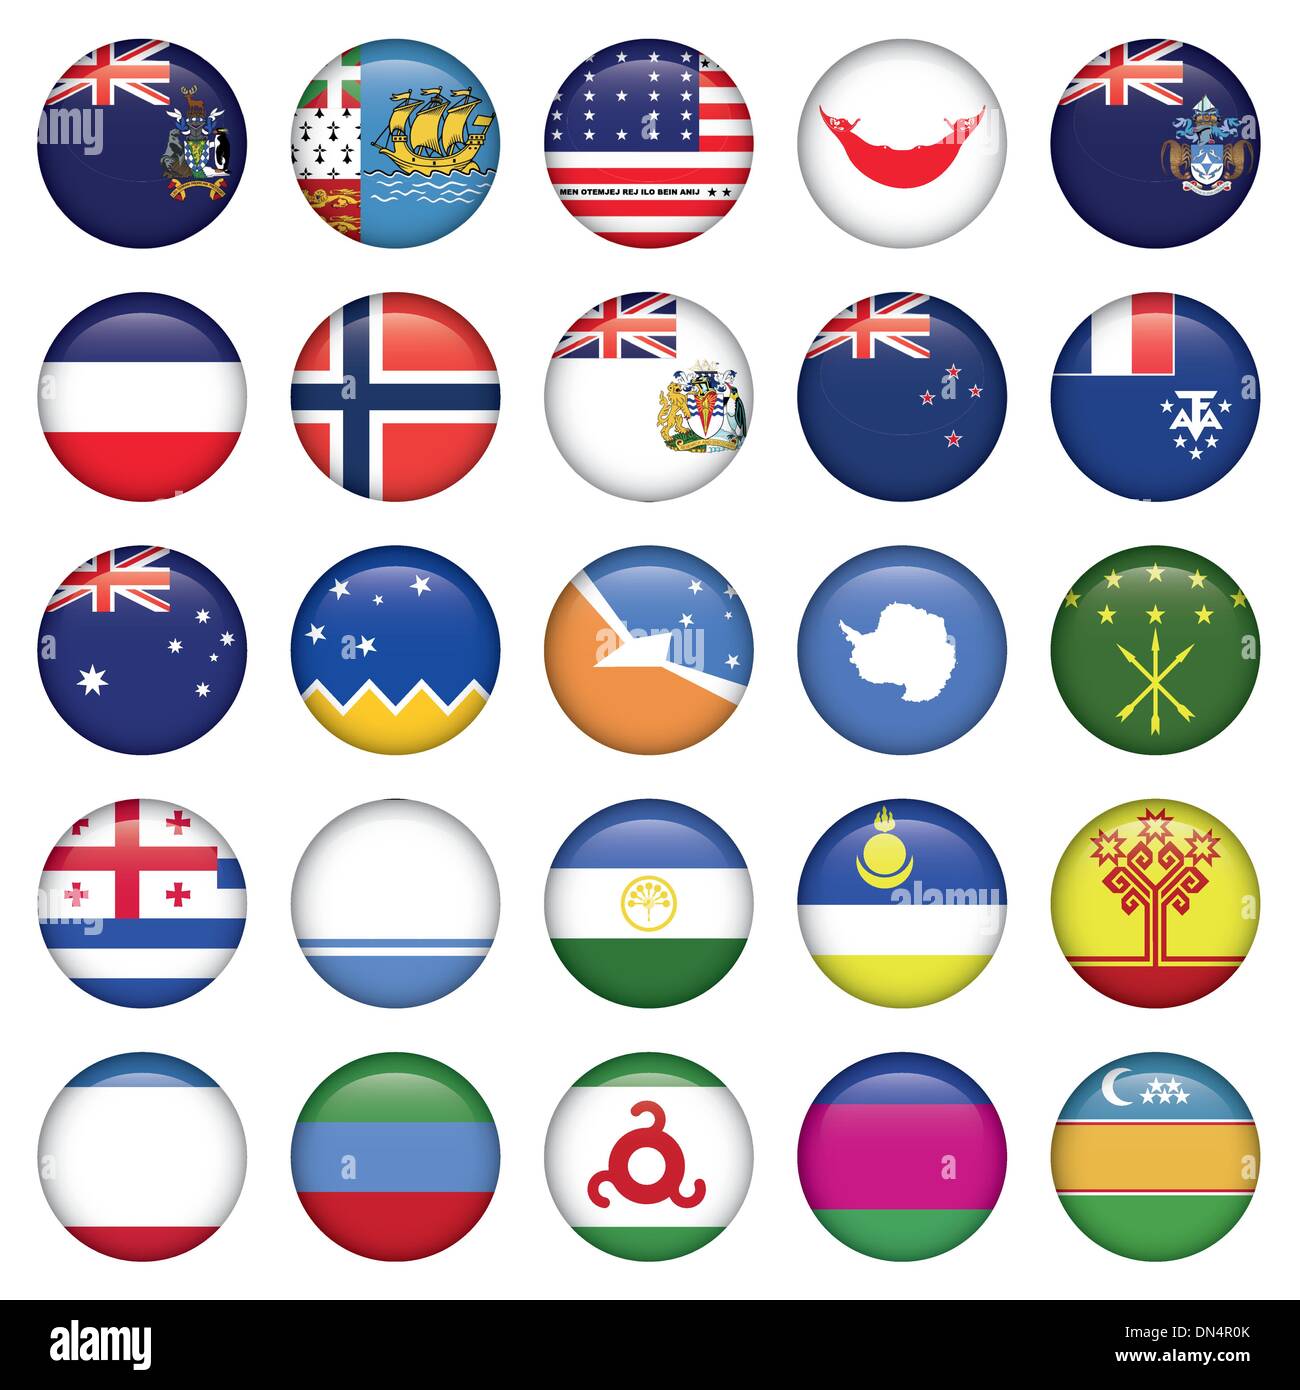 Antarctic and Russian Flags Round Buttons Stock Vector